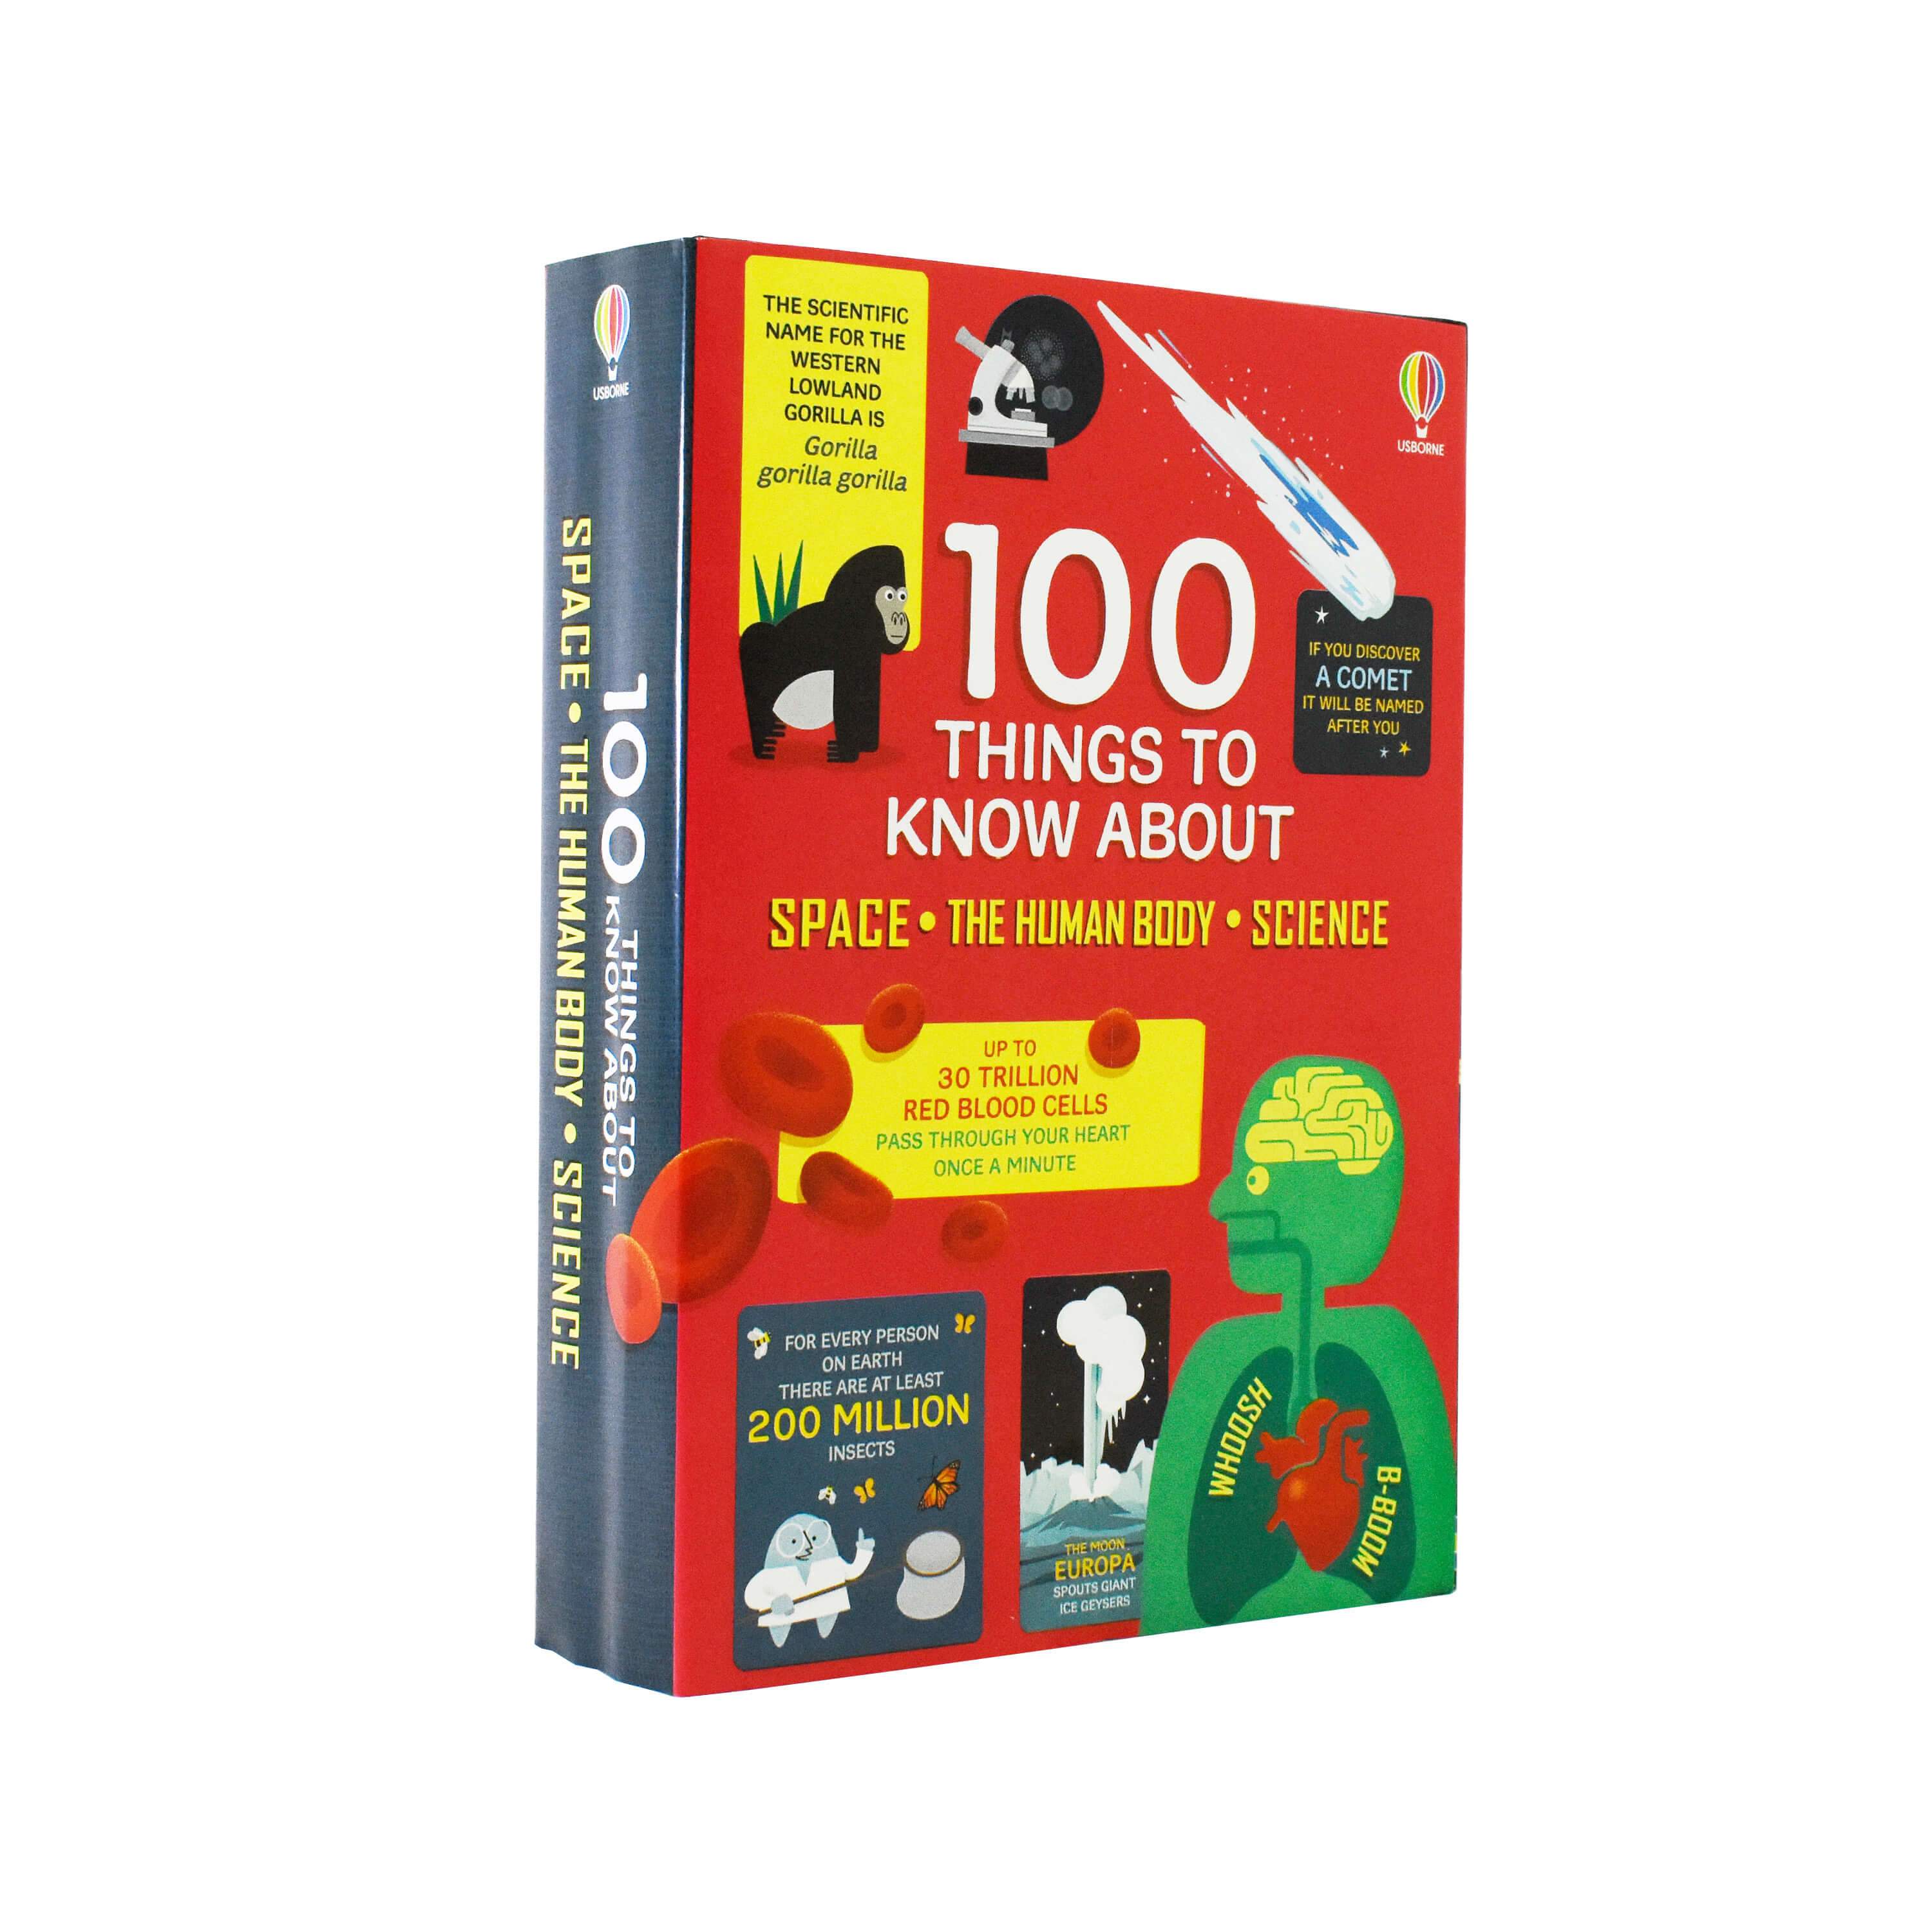 Usborne 100 Things to Know About Space, Science and Human Body 3 Books - Age 5-7 - Hardback by Alex Frith , Jerome Martin & Alice James Usborne Publishing Ltd